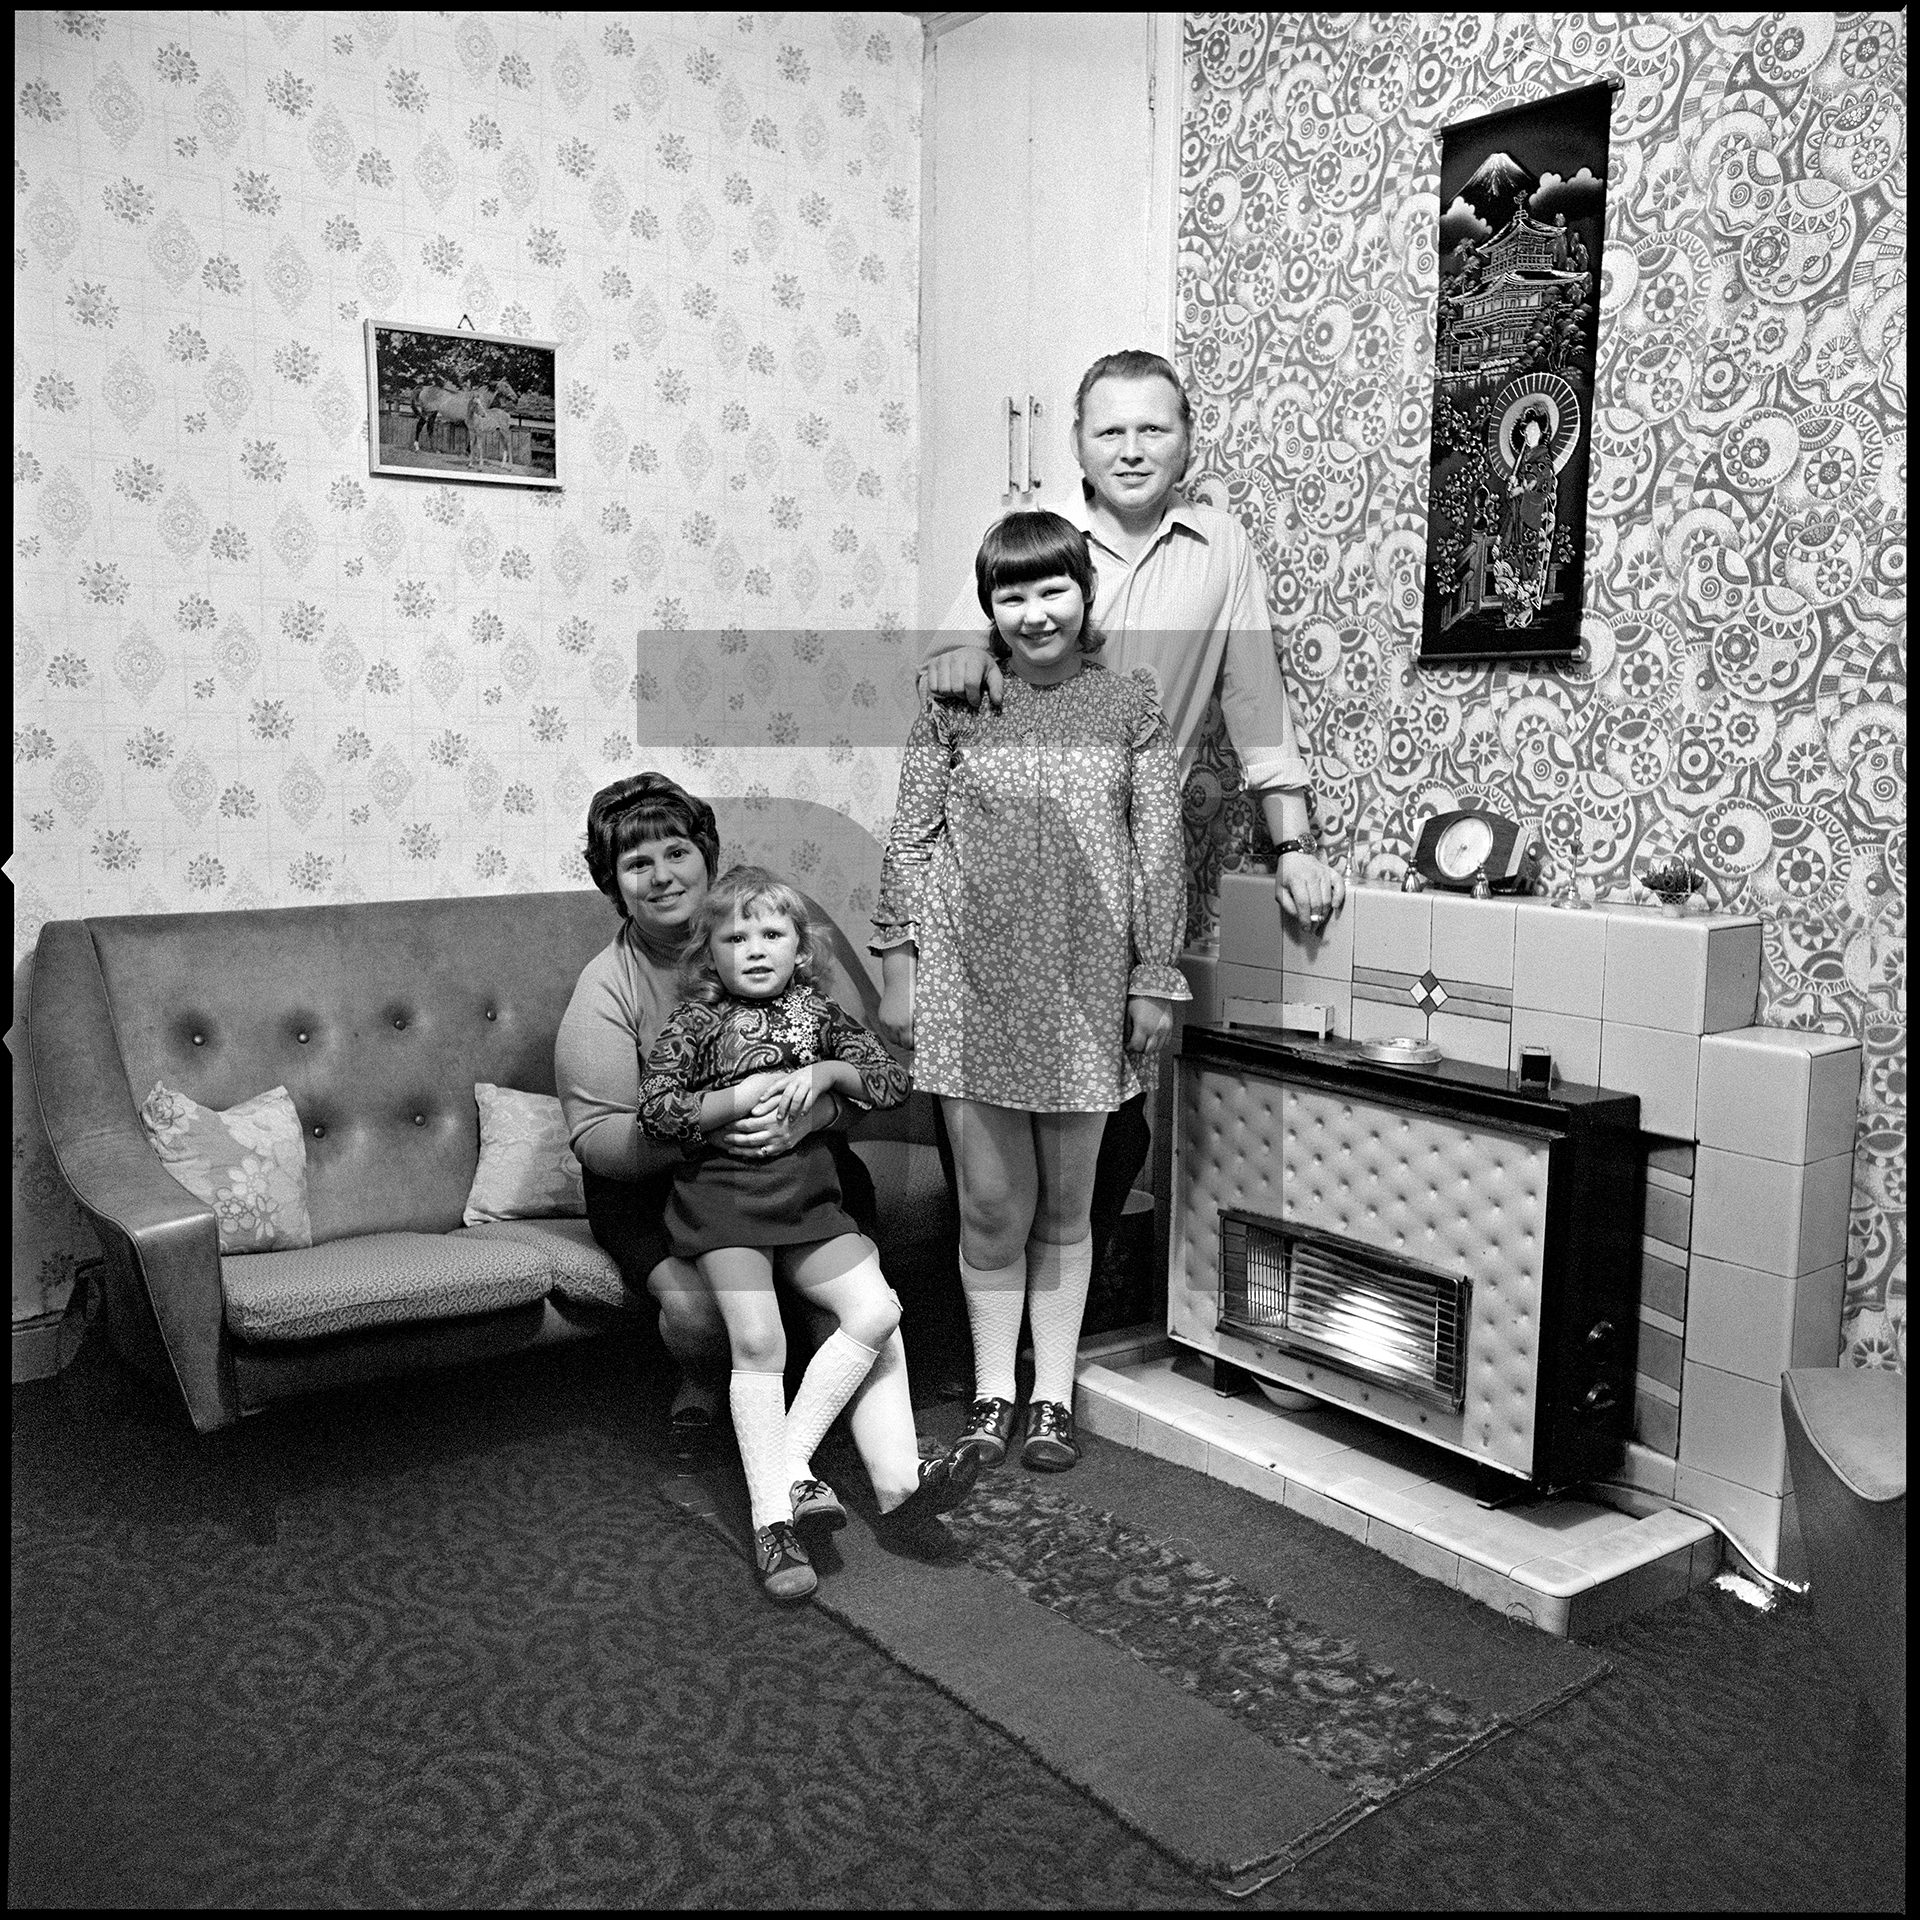 Mary and John Rowlands and daughters Sandra (standing) and Gillian. (Identified as her relations in 2011 by Debbie Fielding, publications administrator at Cornerhouse.) Residents of June Street, Salford. 1973 by Daniel Meadows